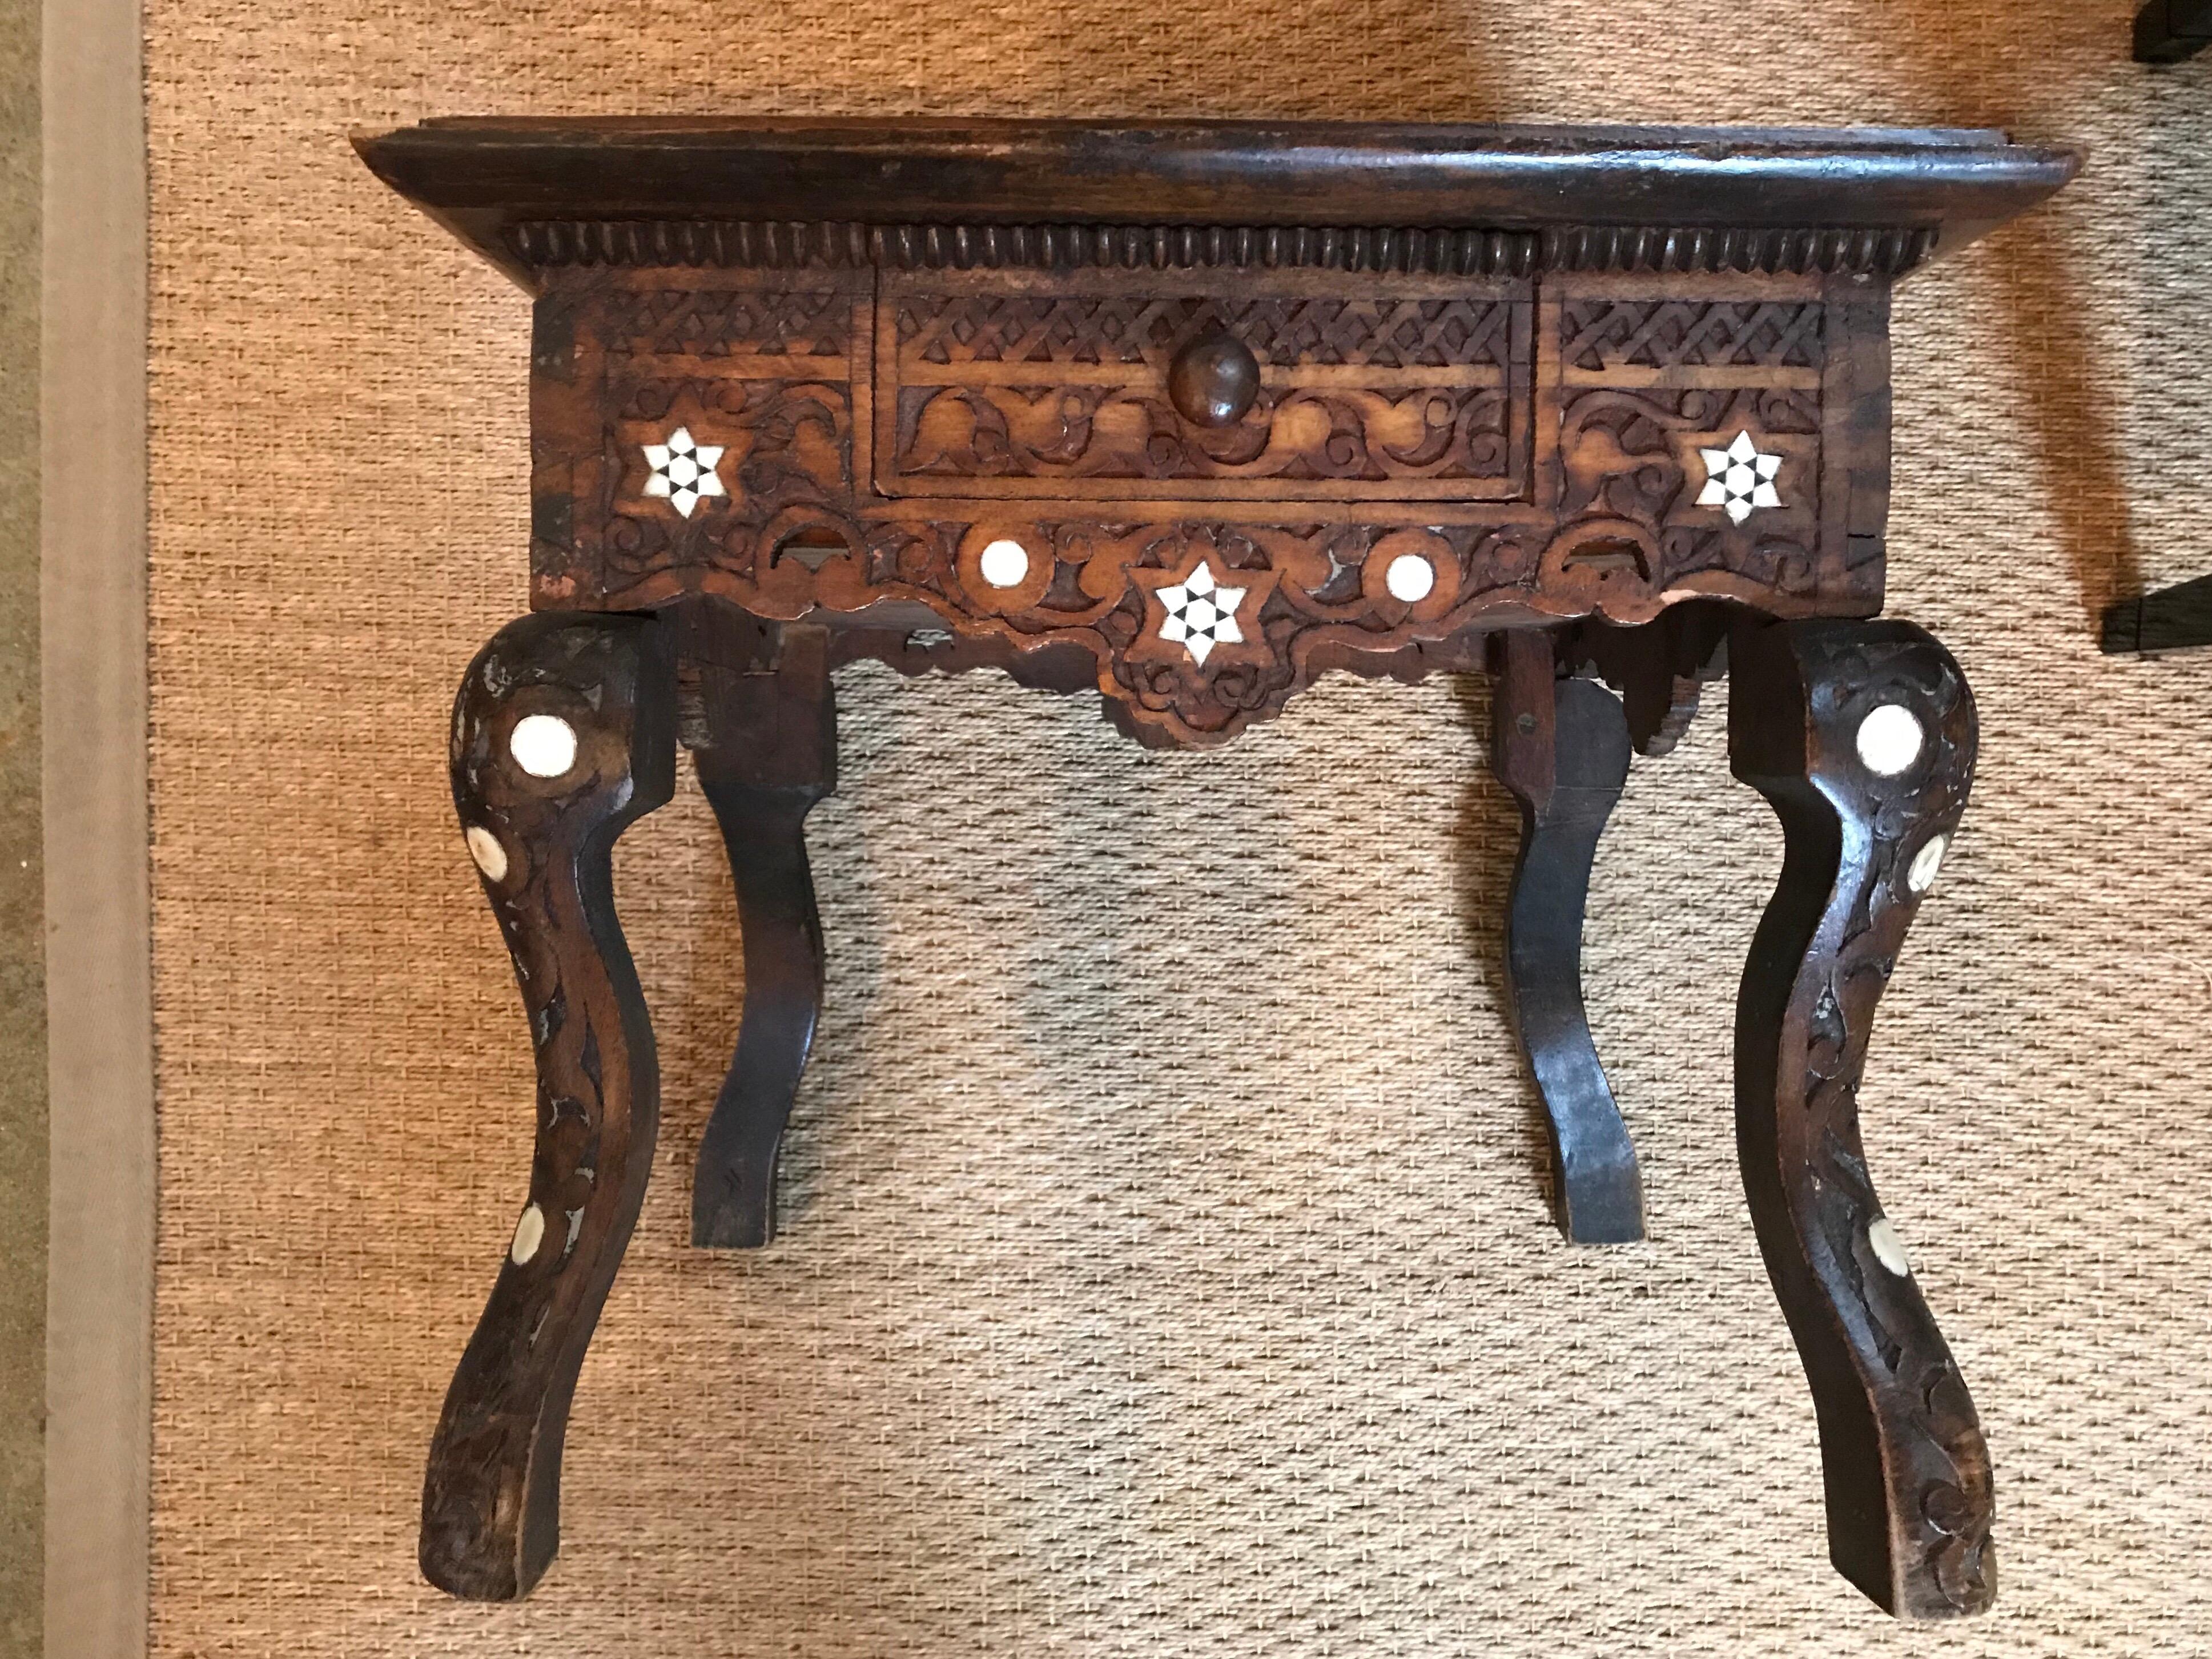 This small, Syrian inlaid dark wooden table has a single drawer, a square top, with cabriole legs and is ornately decorated.